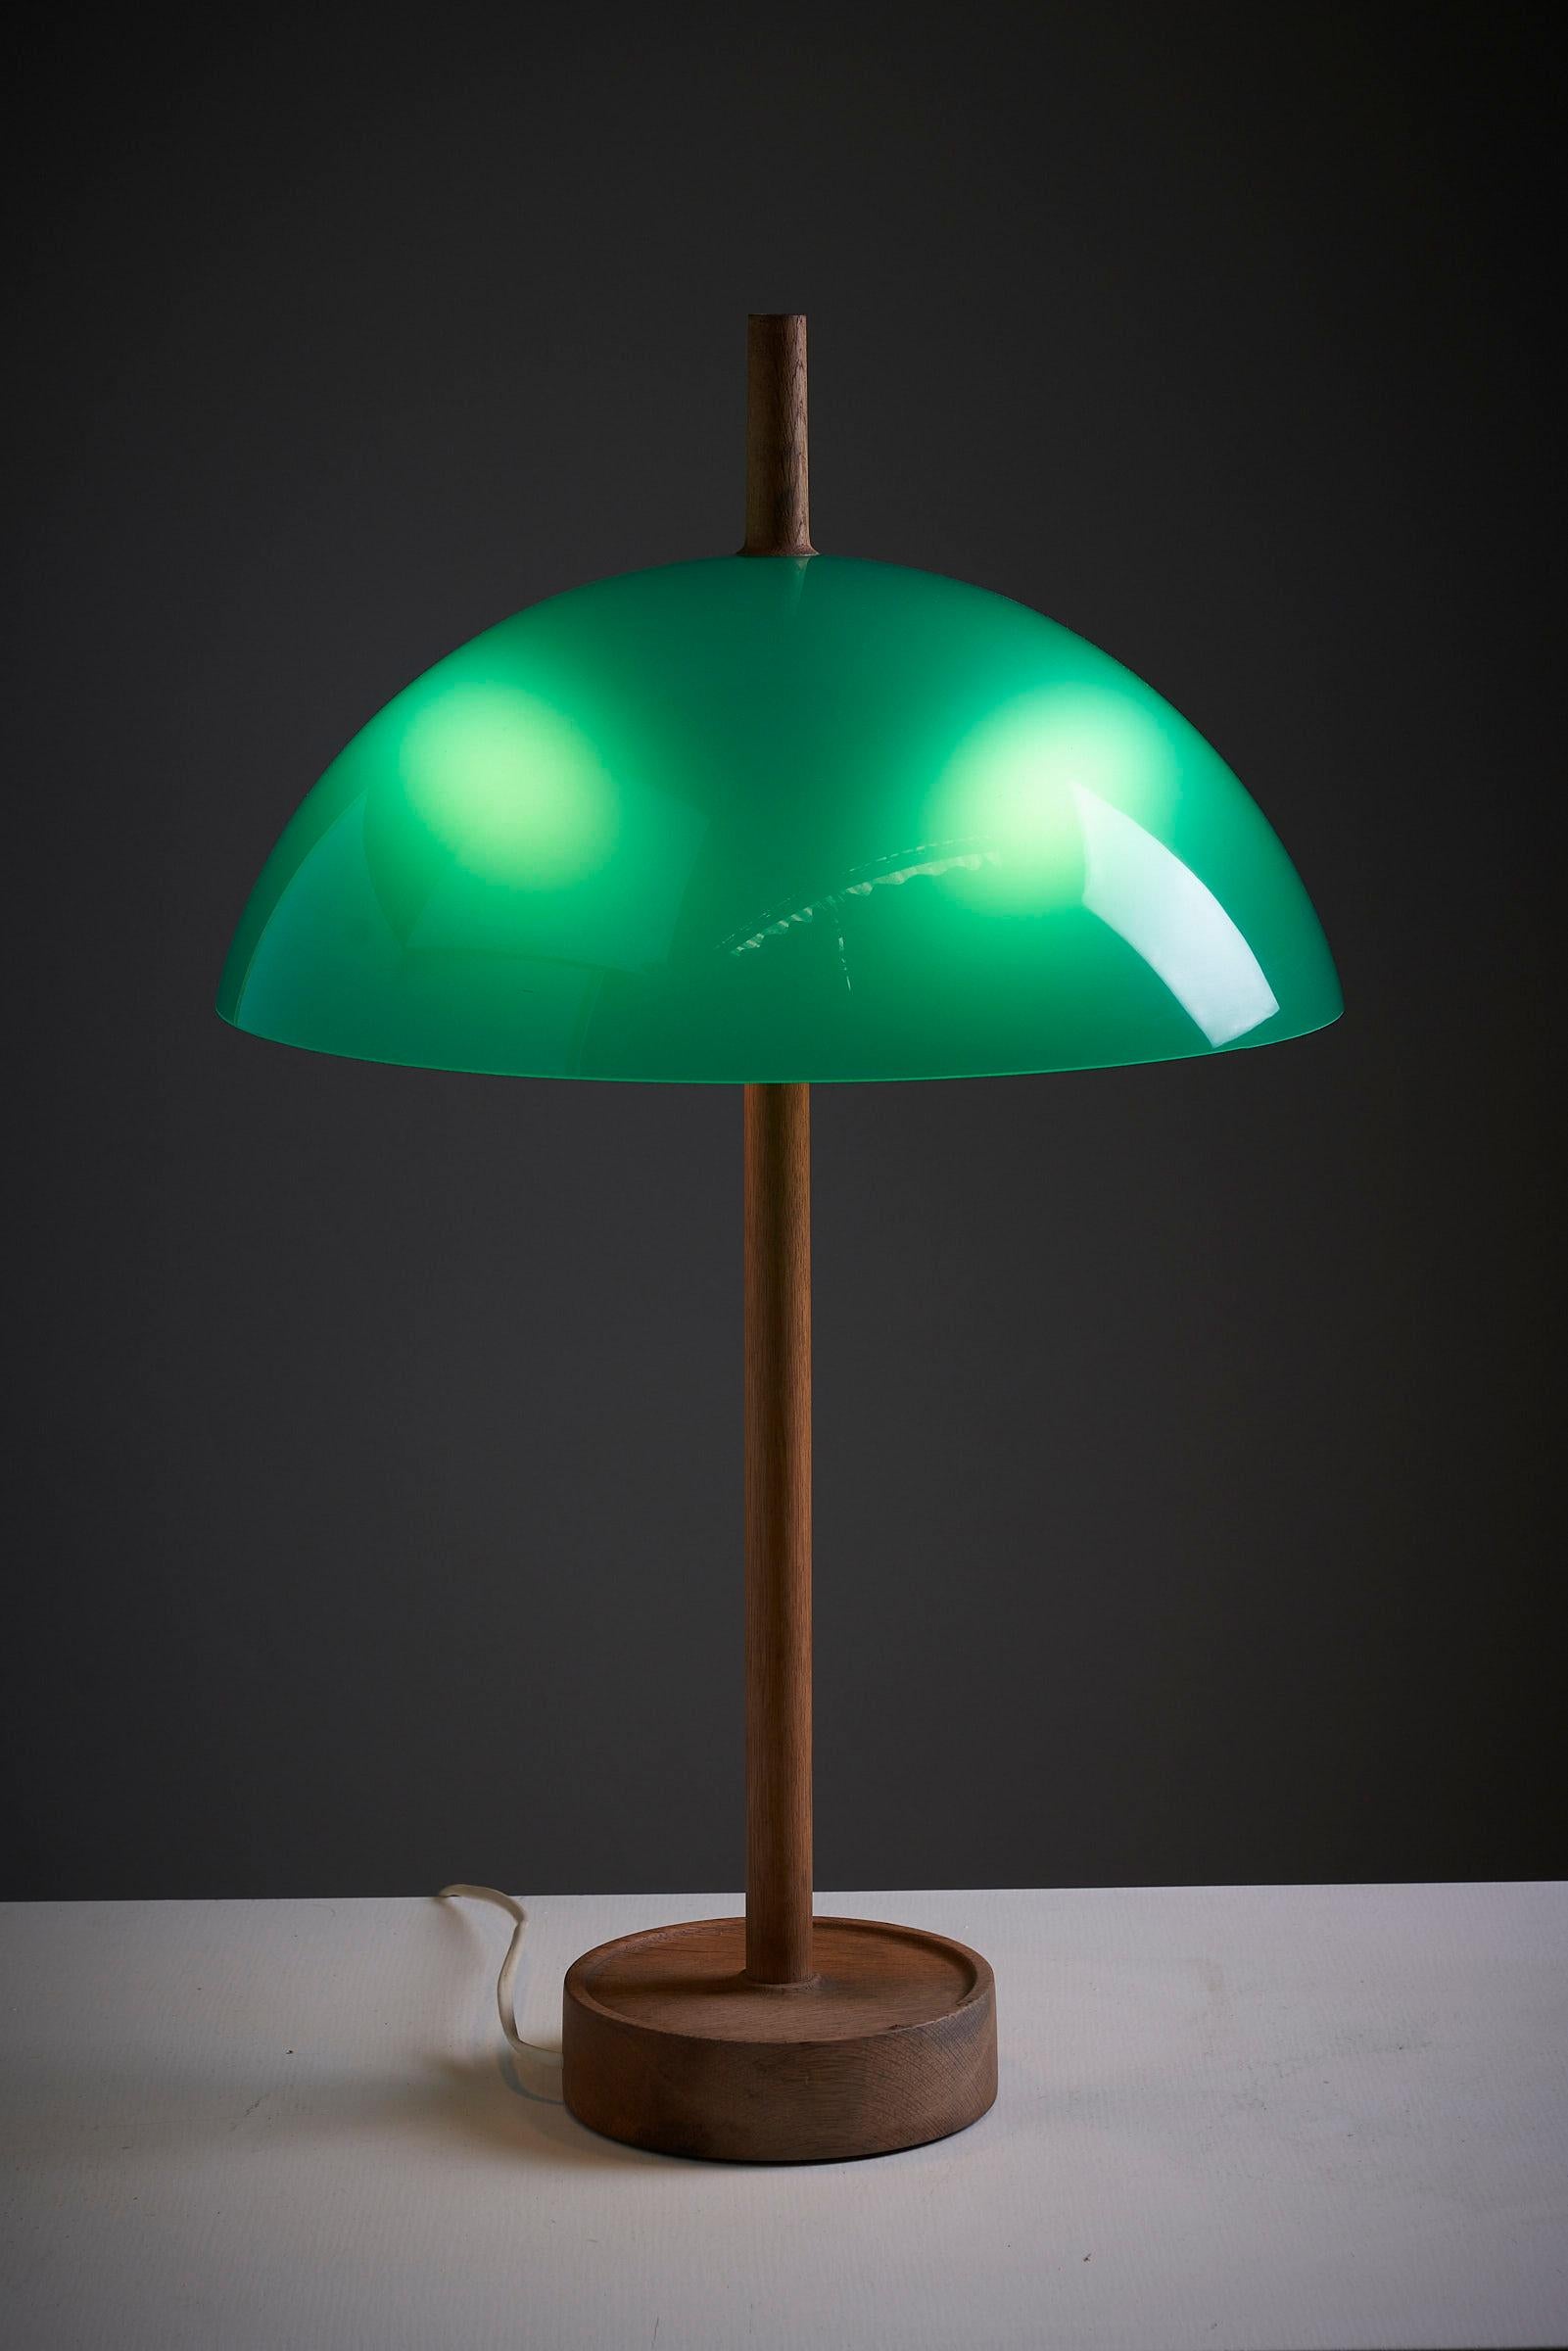 Introducing a captivating Mid-century table light crafted by 